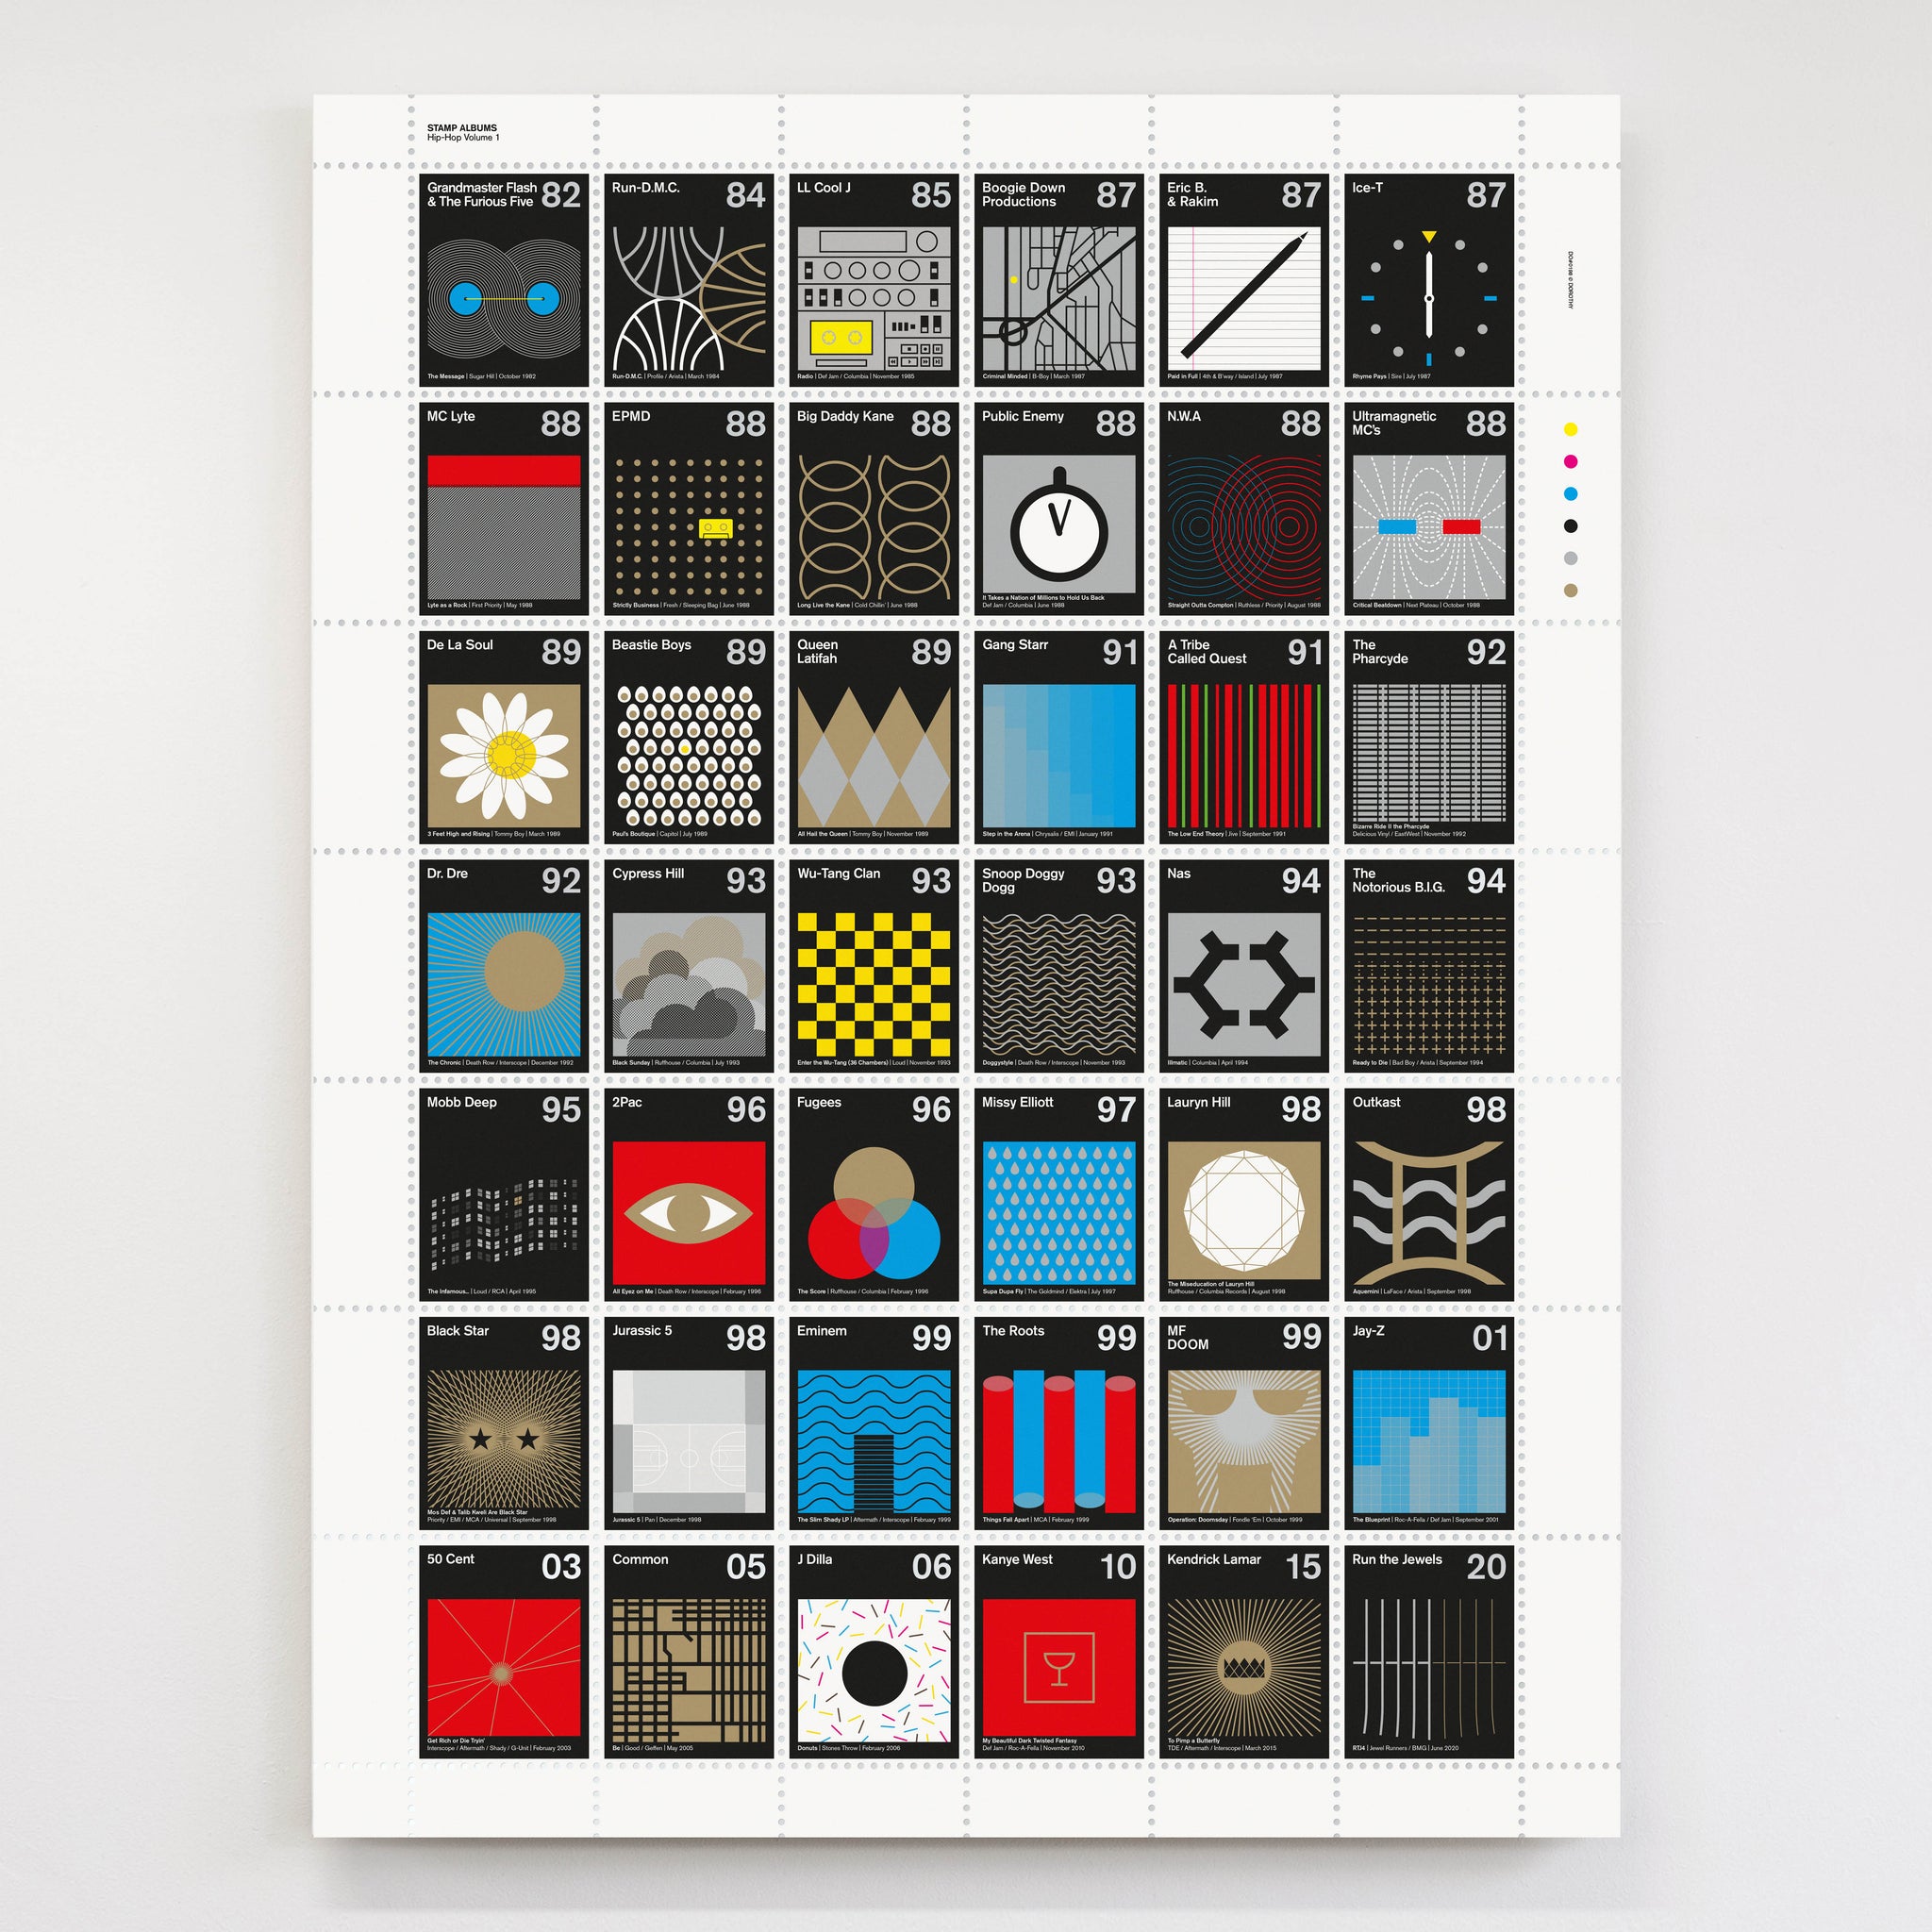 Stamp Album: Stamp Albums For Collectors - Stamp Coll by Prints